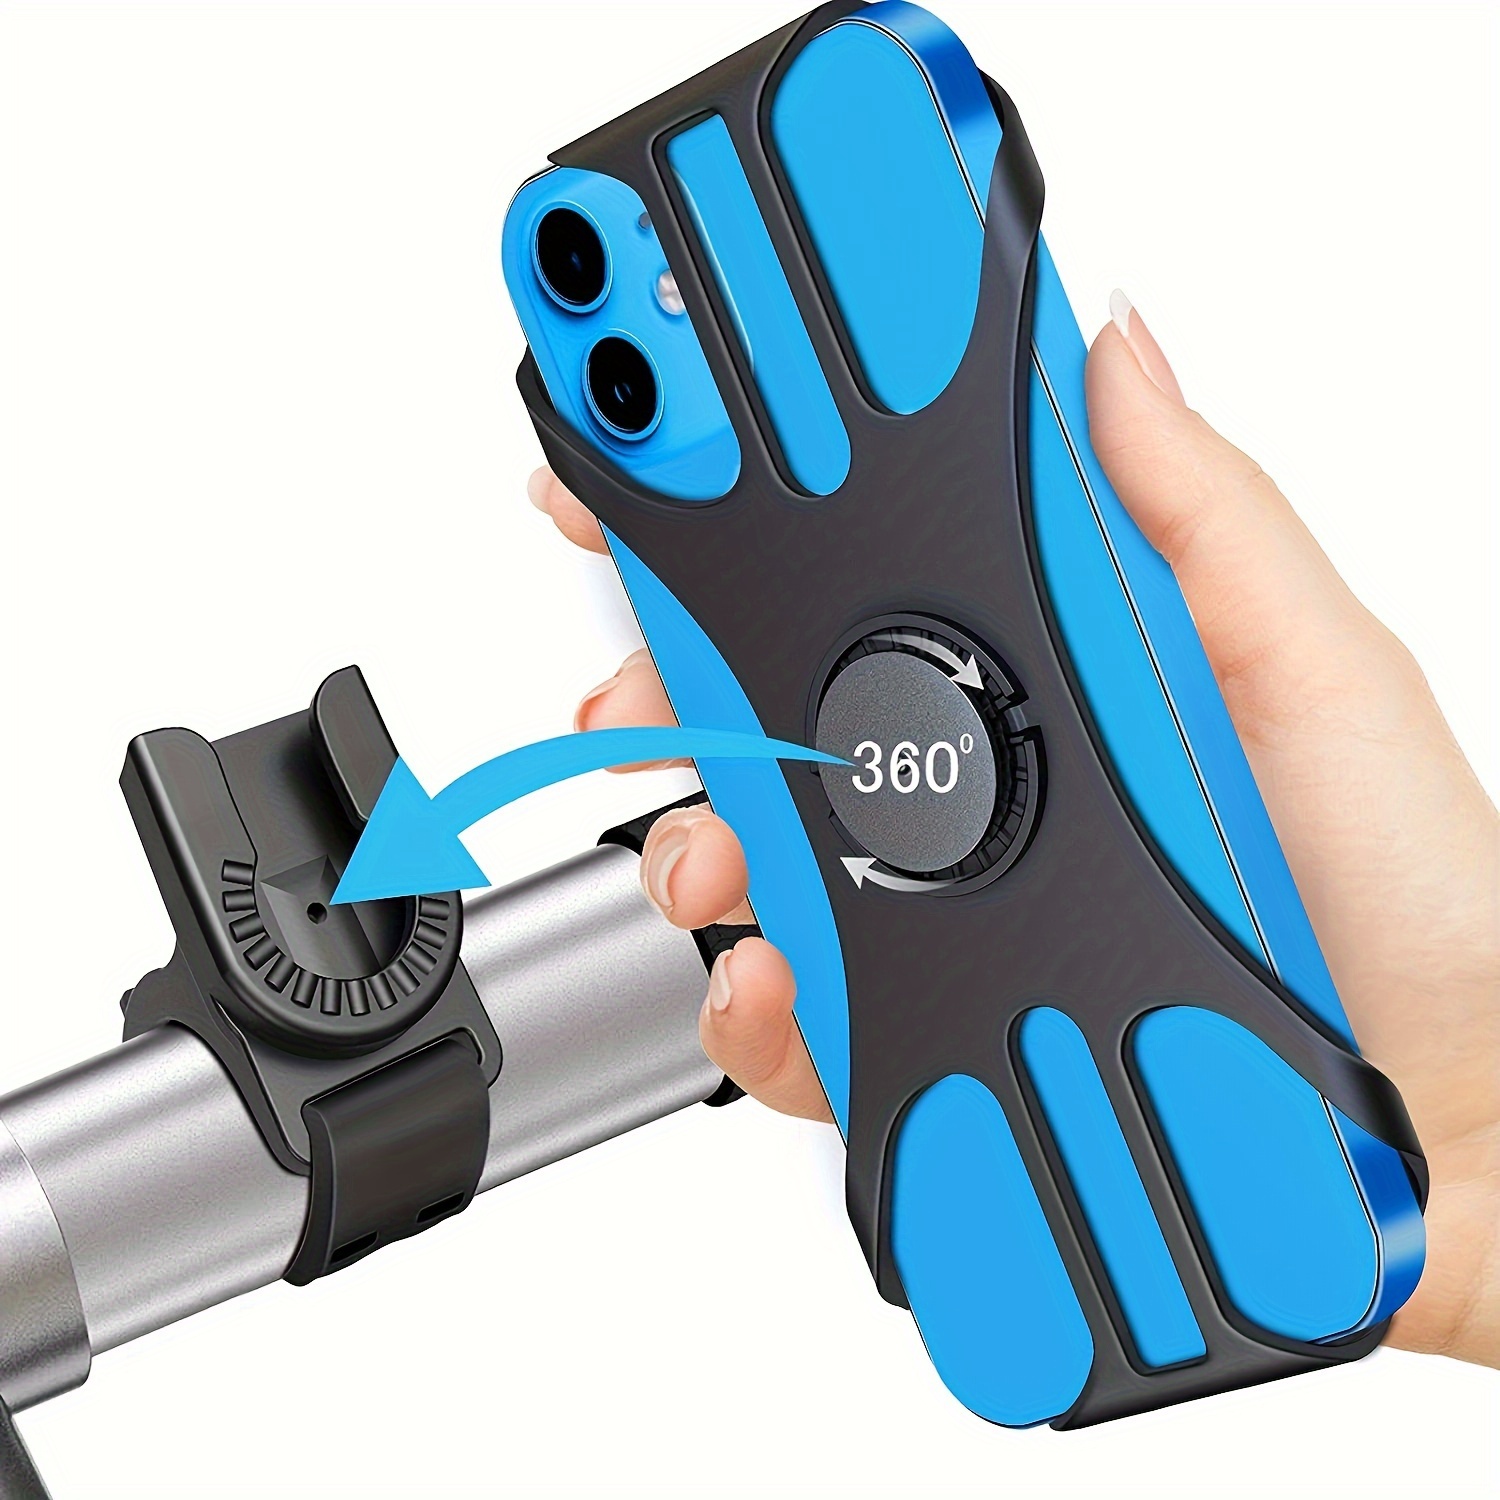 

Detachable Bike Phone Holder, Silicone Phone Holder,bicycle Motorcycle Phone Mount, 360° Rotatable Adjustable Bike Phone Mount For 4"-6.7"smartphones